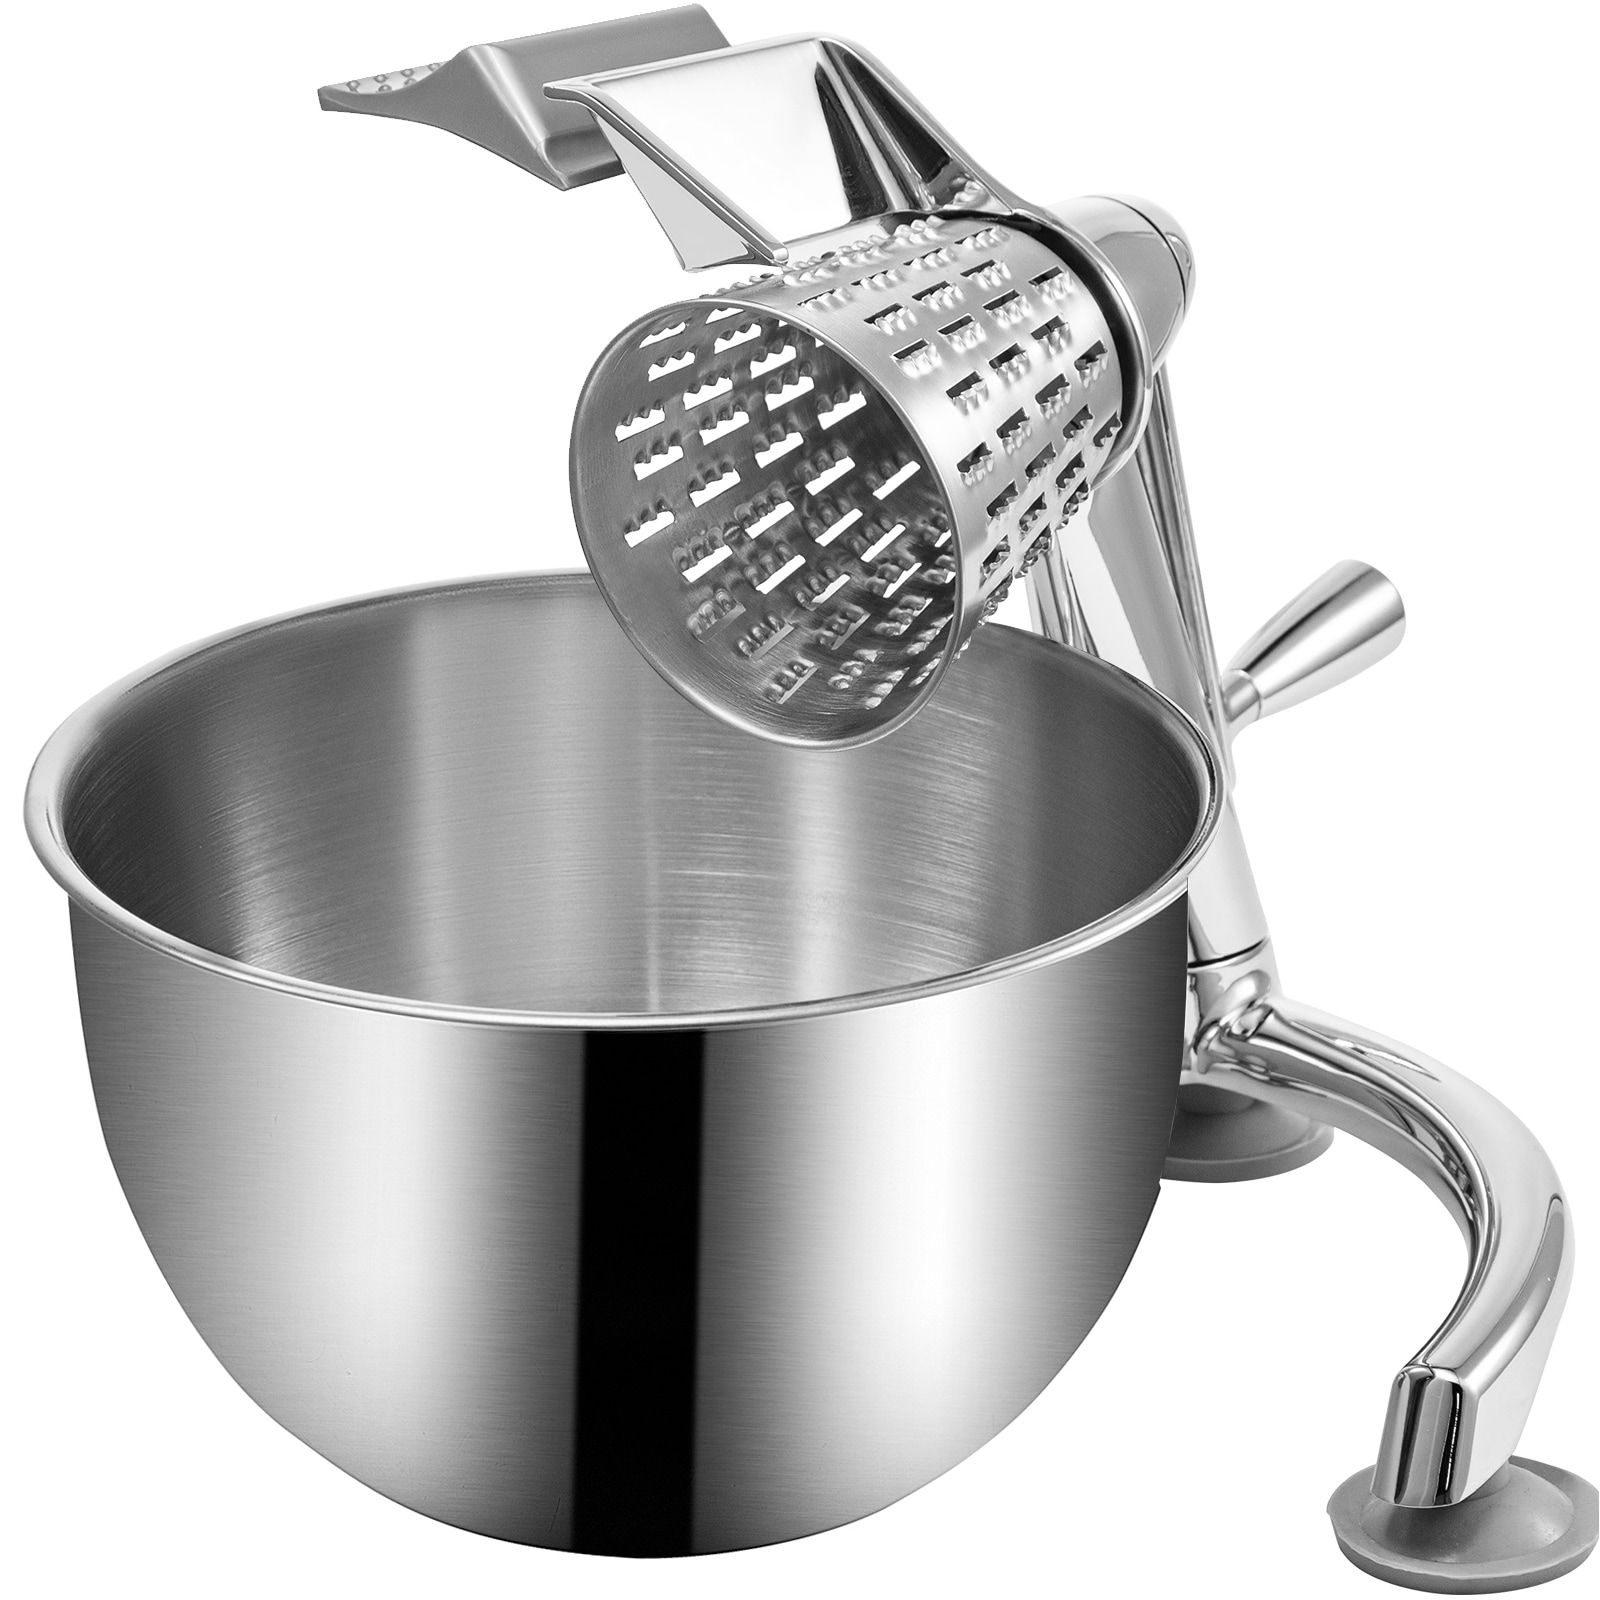 https://ak1.ostkcdn.com/images/products/is/images/direct/62d7e542b535ab2e5b16a434d4b6460487450ef0/VEVOR-Rotary-Cheese-Grater-Zinc-Alloy-Rotary-Vegetable-Mandoline-Manual-Cheese-Mandoline-w--5-Stainless-Steel-Cutting-Cones.jpg